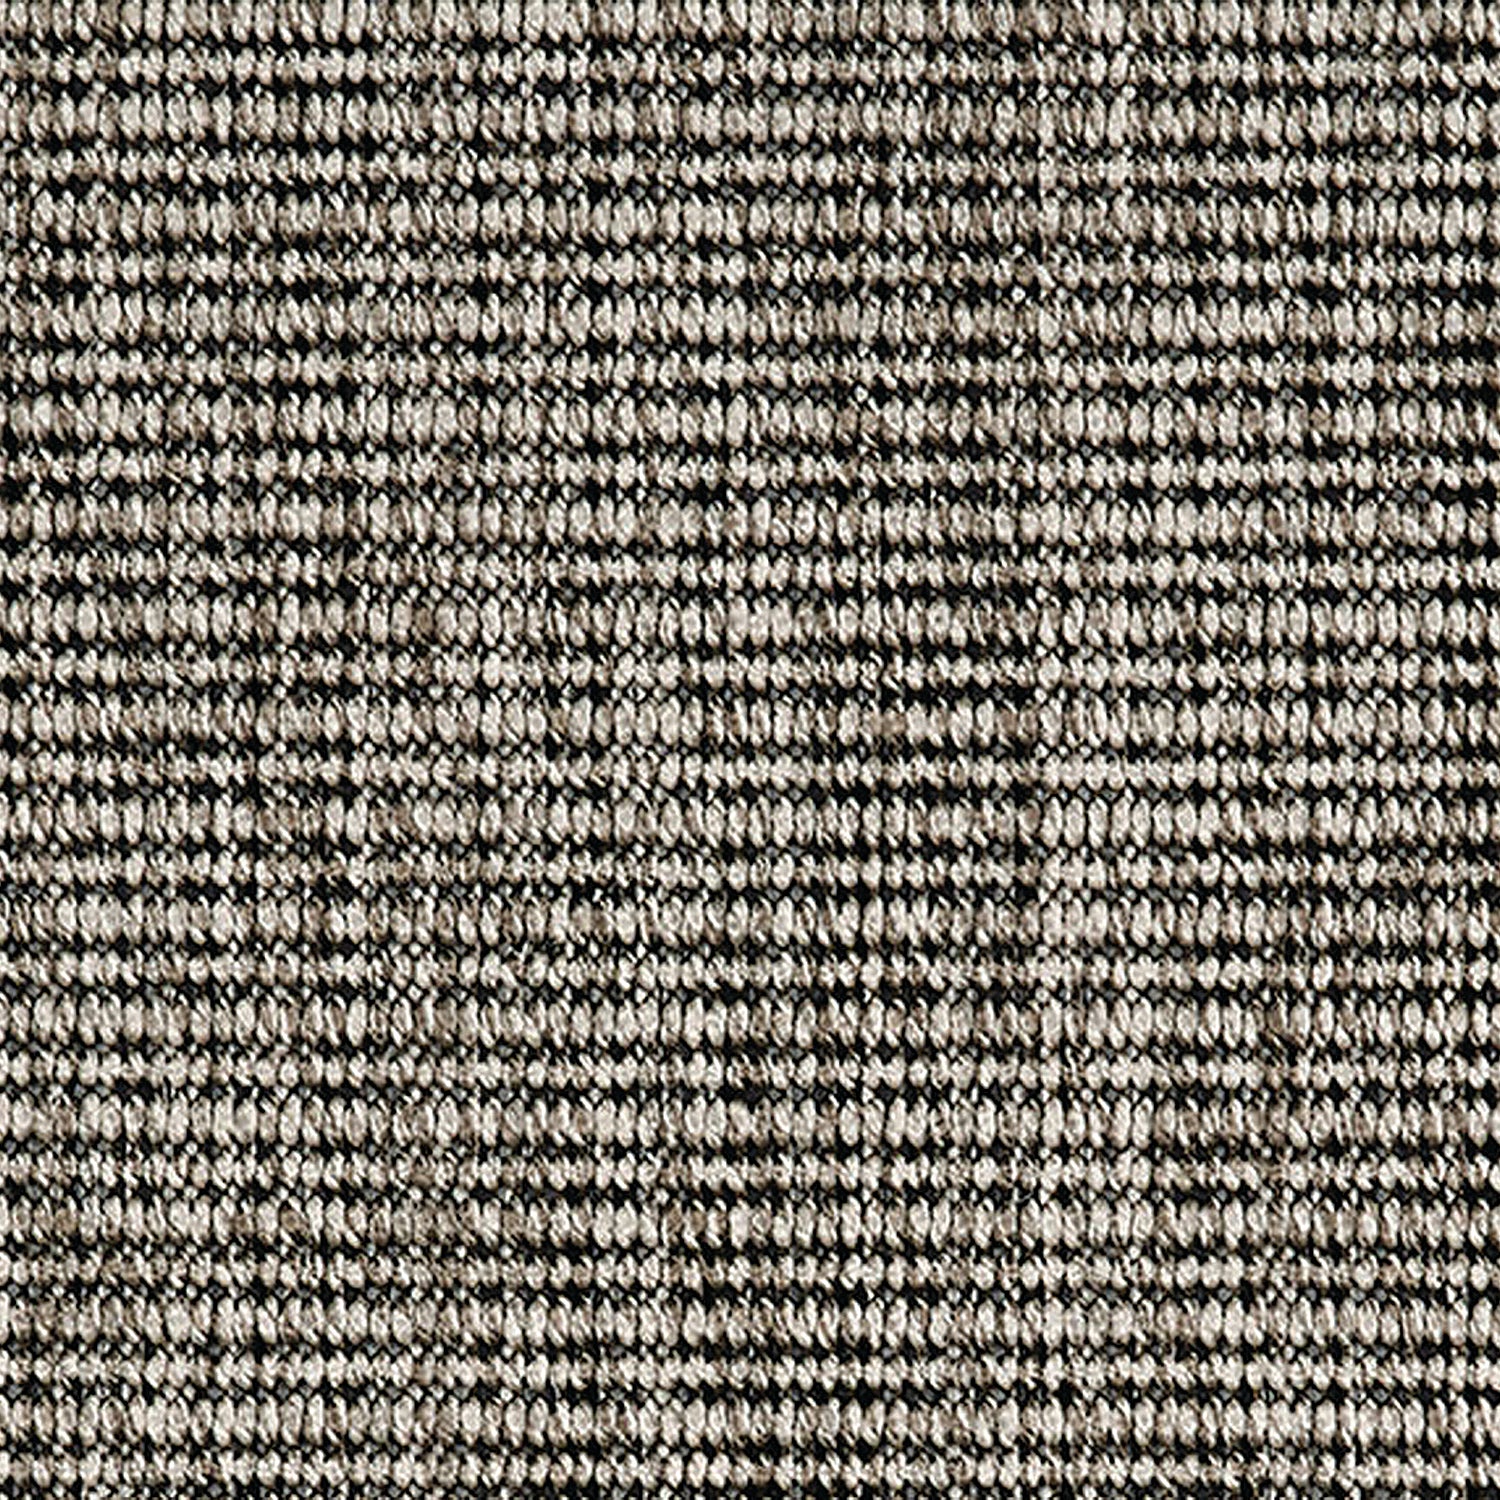 Outdoor broadloom carpet swatch in a textured stripe weave in tan and charcoal.